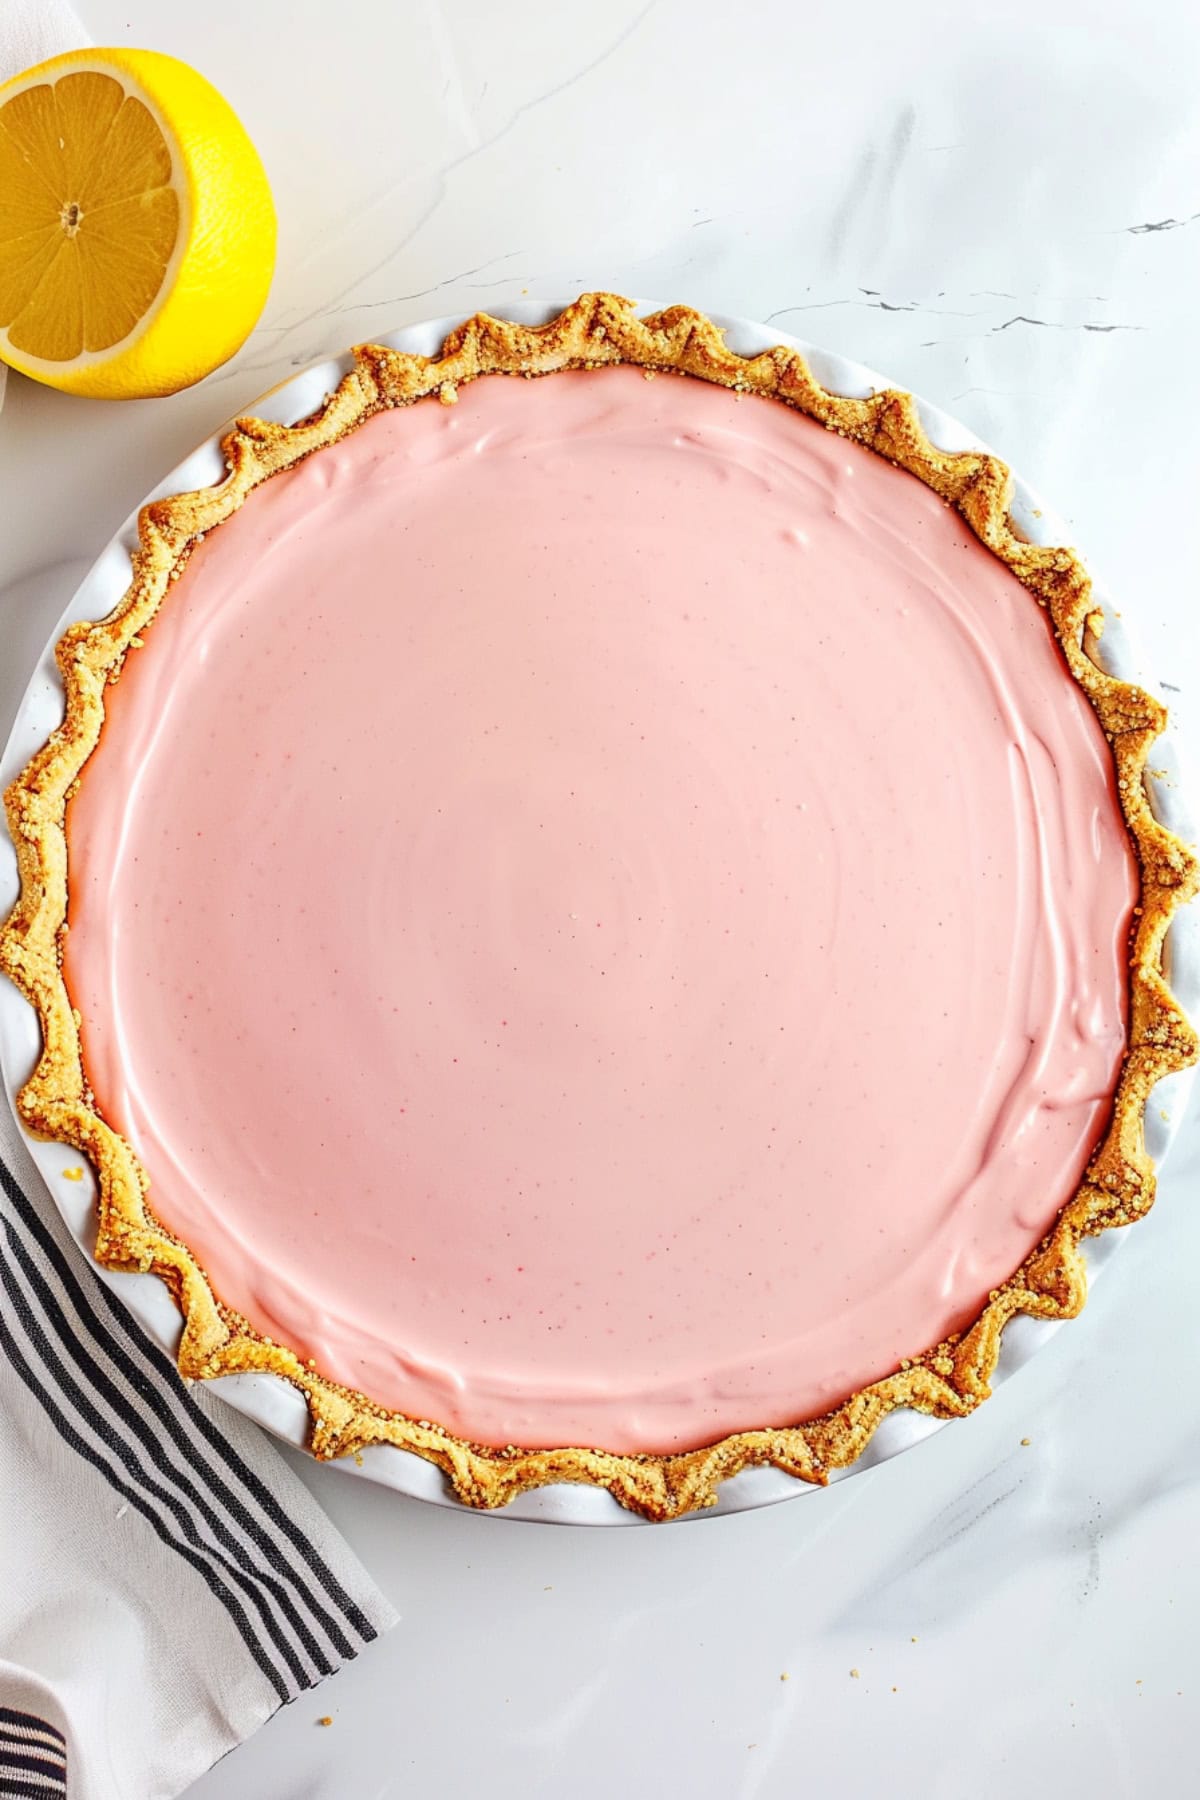 Top view of a whole pink lemonade pie with fresh lemon on the side.